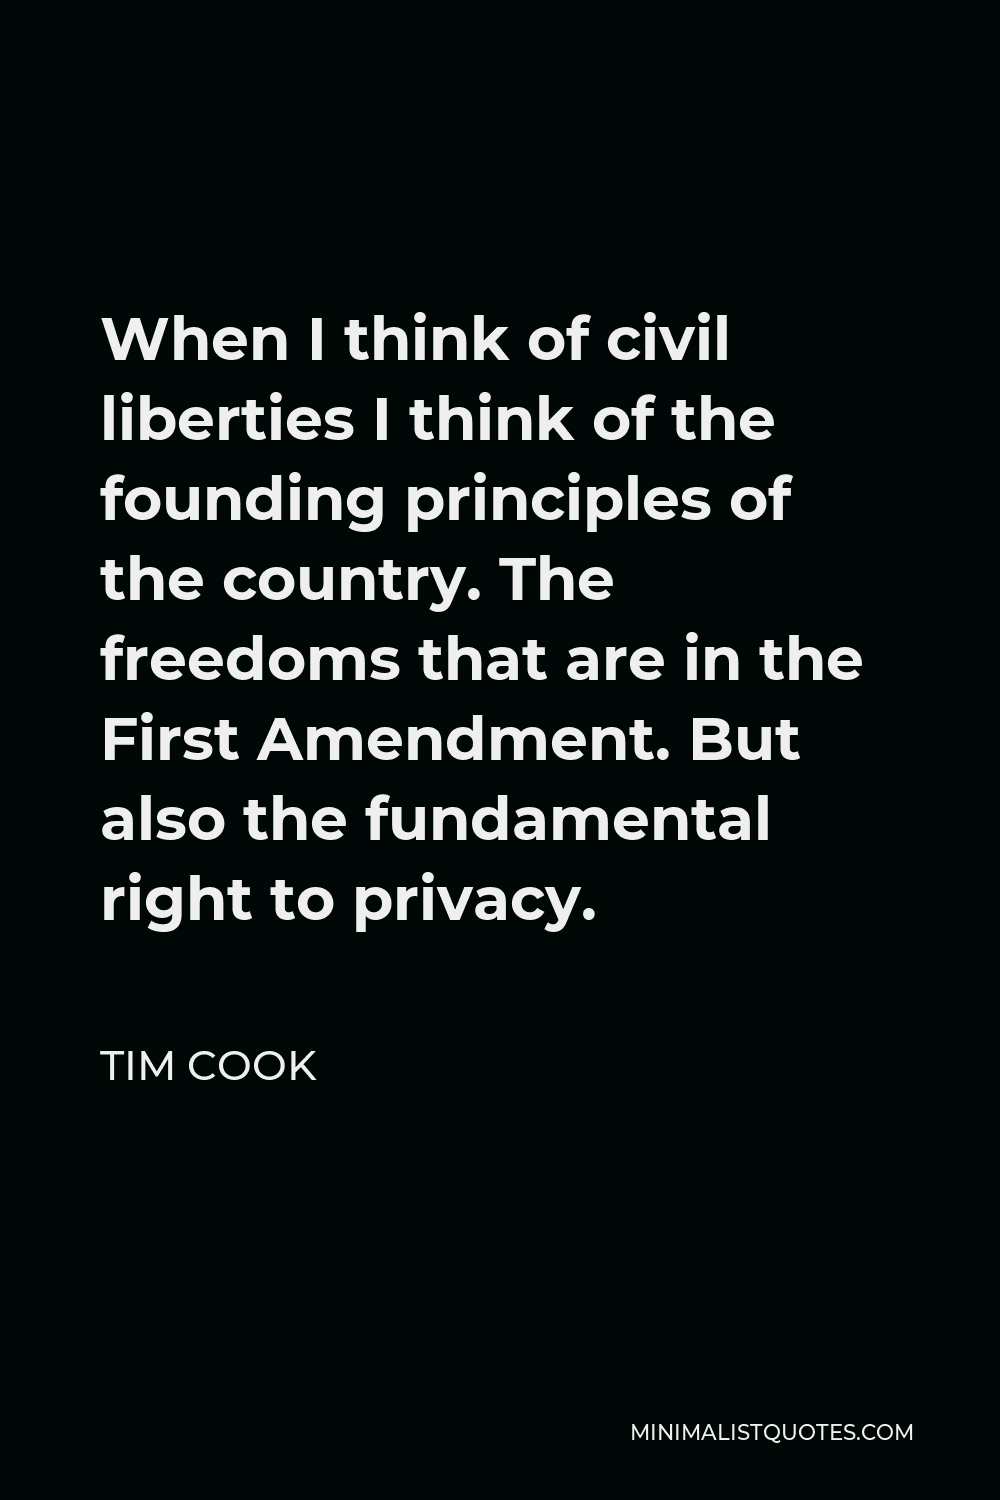 Tim Cook Quote - When I think of civil liberties I think of the founding principles of the country. The freedoms that are in the First Amendment. But also the fundamental right to privacy.